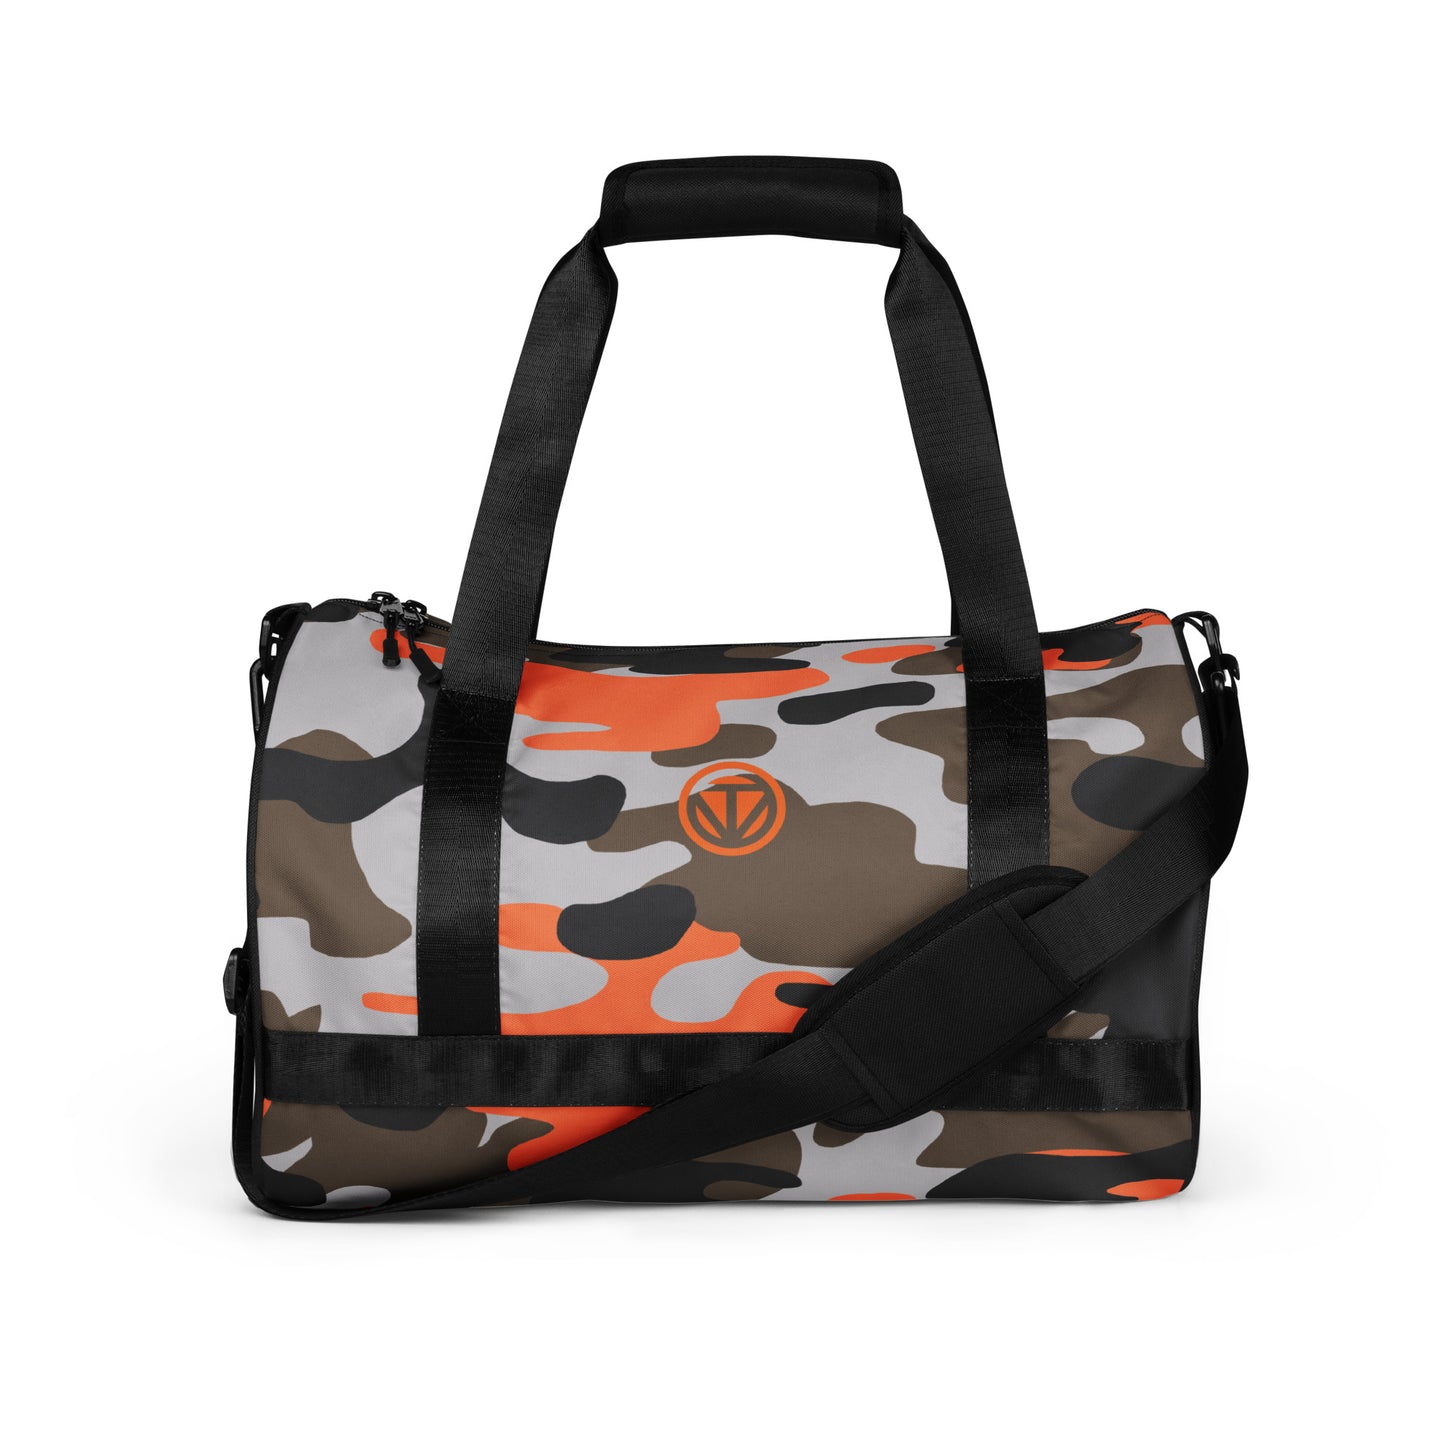 TIME OF VIBES - Sports Bag CAMO - €85.00